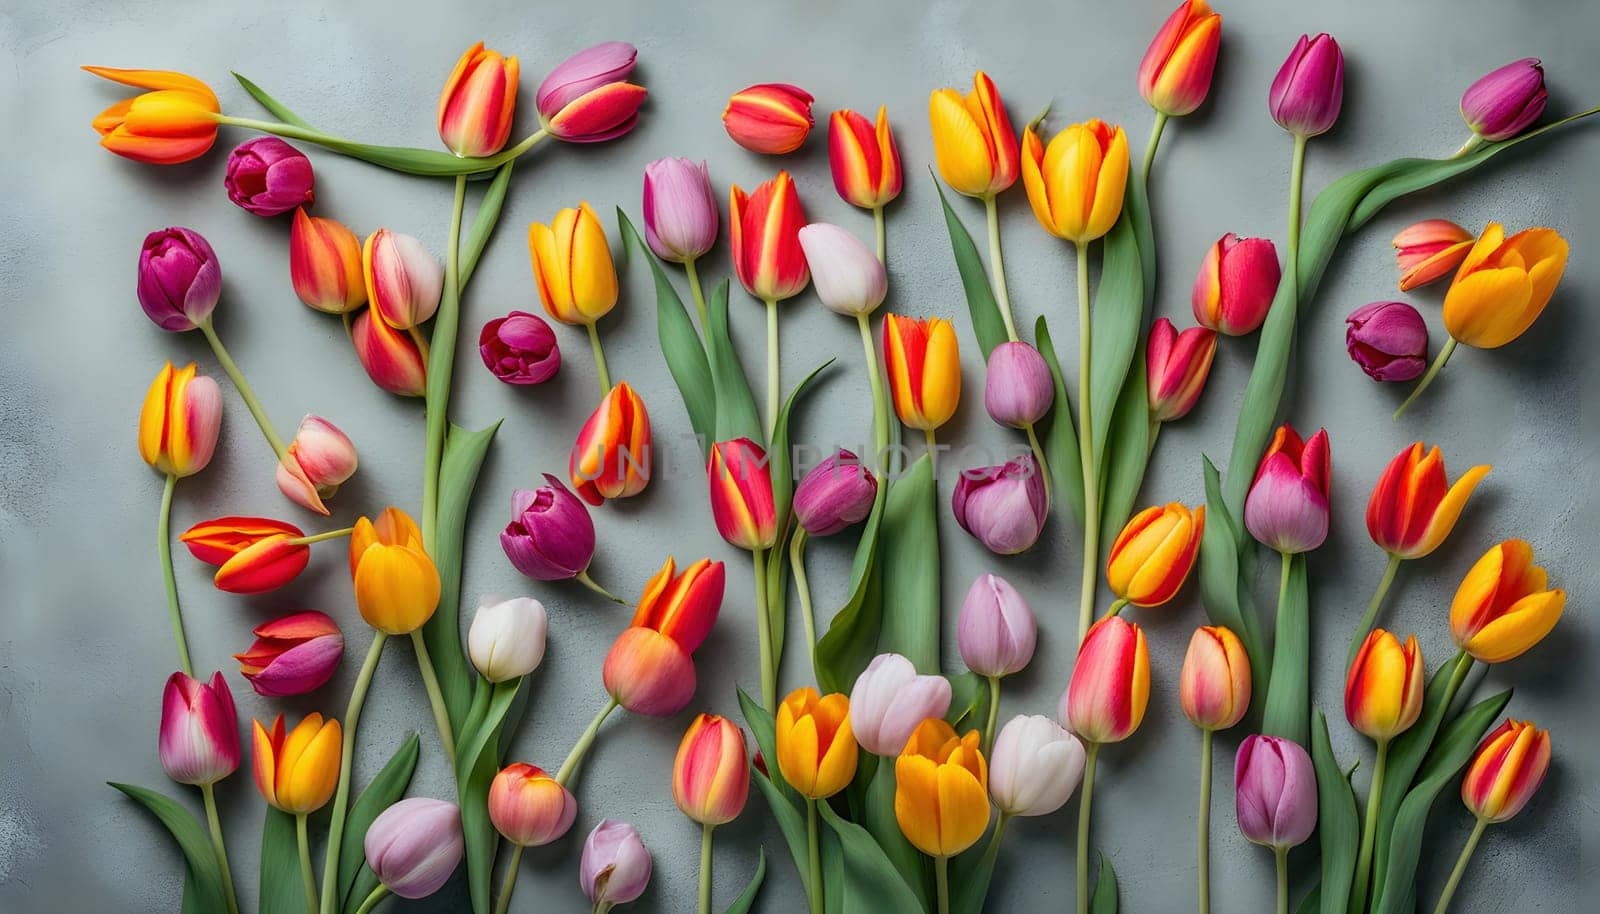 Assorted Tulips Arranged on Textured Background by rostik924